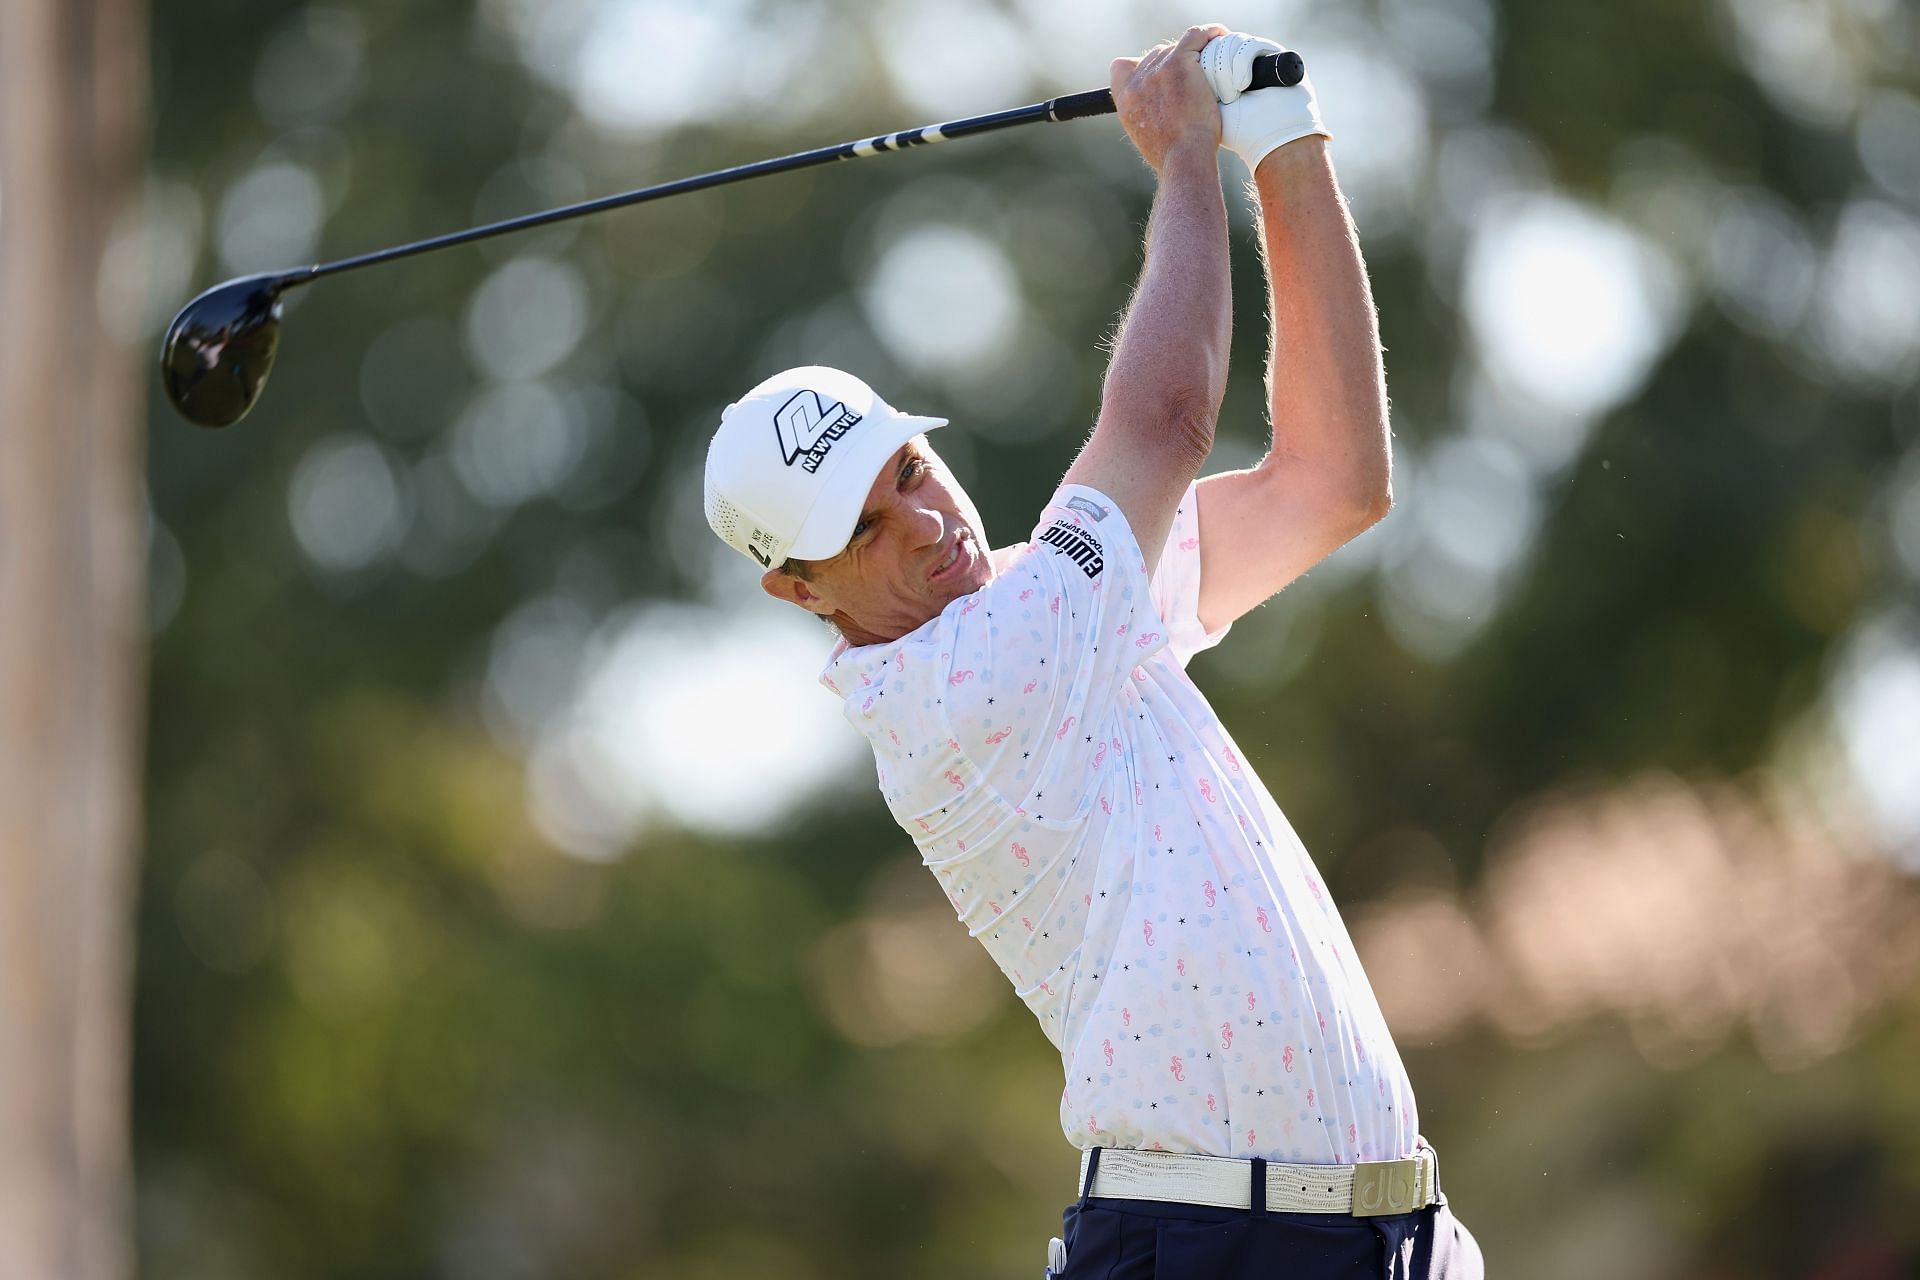 Who is leading the 2023 Charles Schwab Cup Championship after Round 3